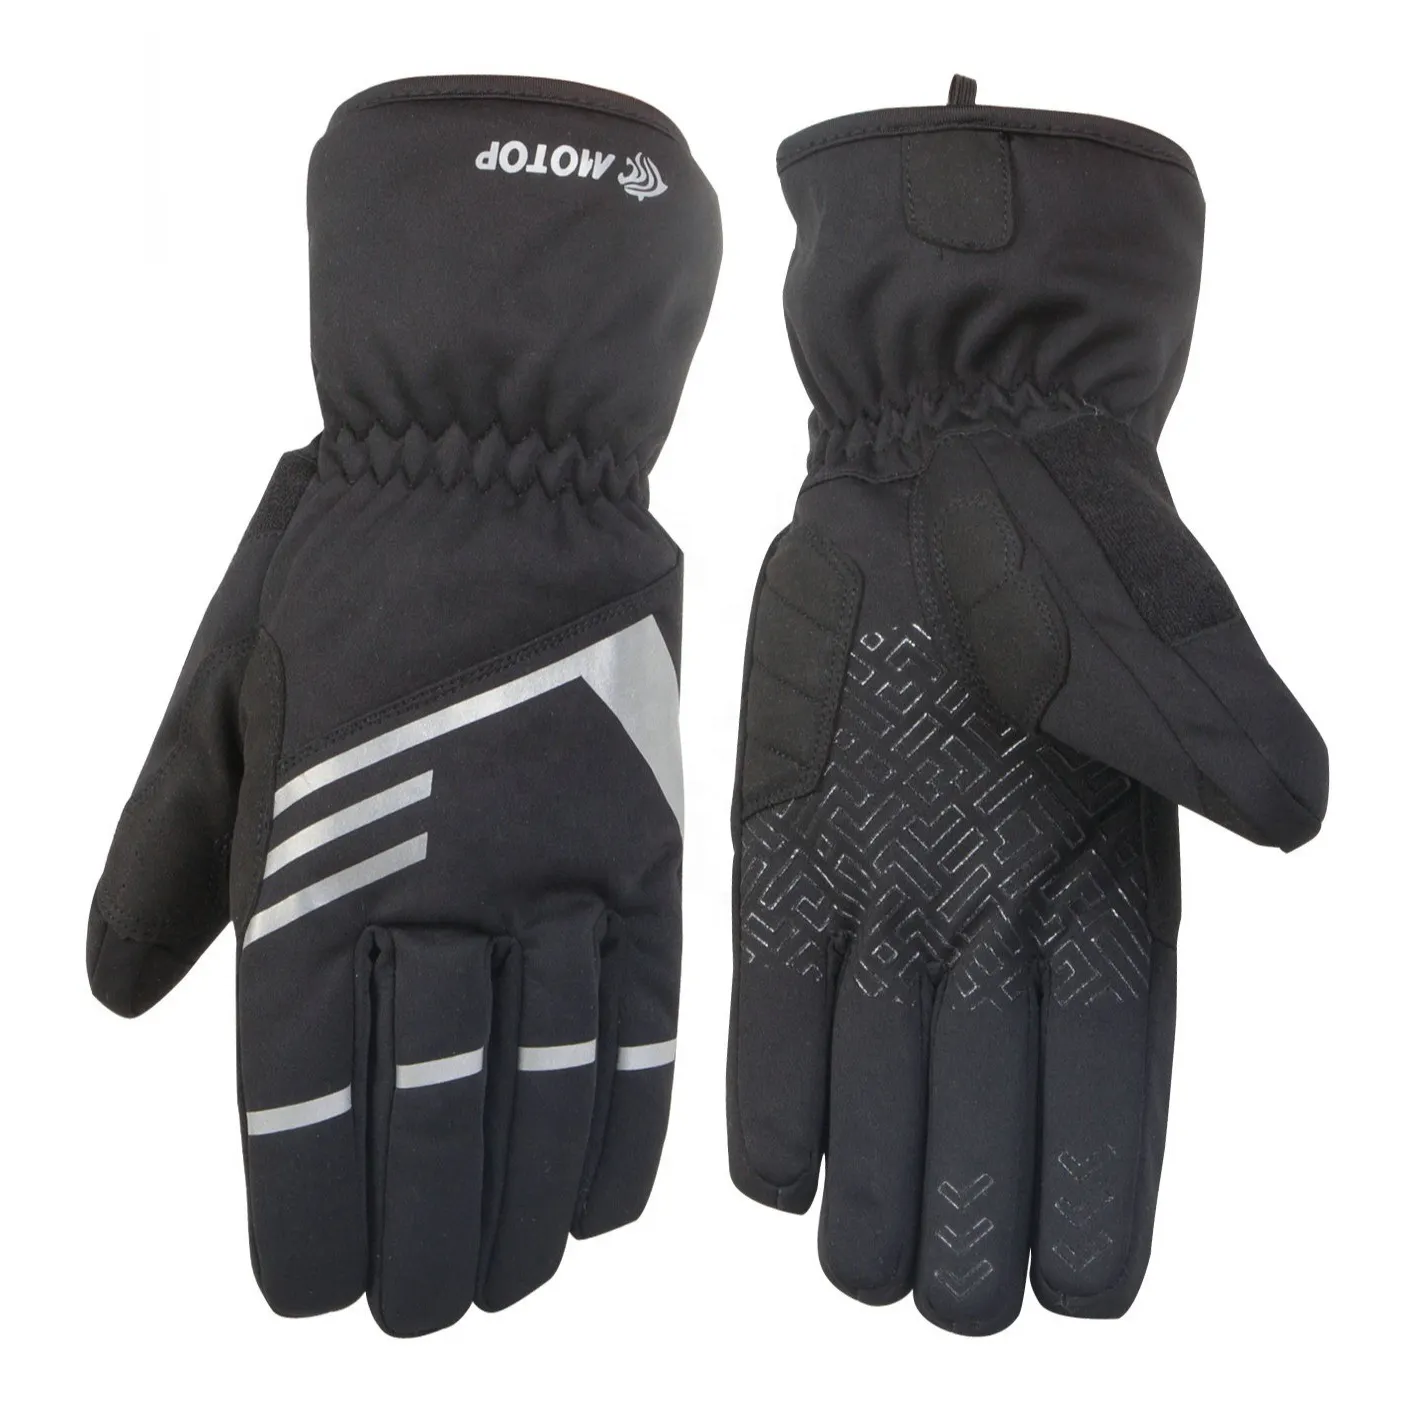 Glove Outdoor Windproof And Waterproof Outdoor Cycling Winter Racing Gloves With GEL Padding